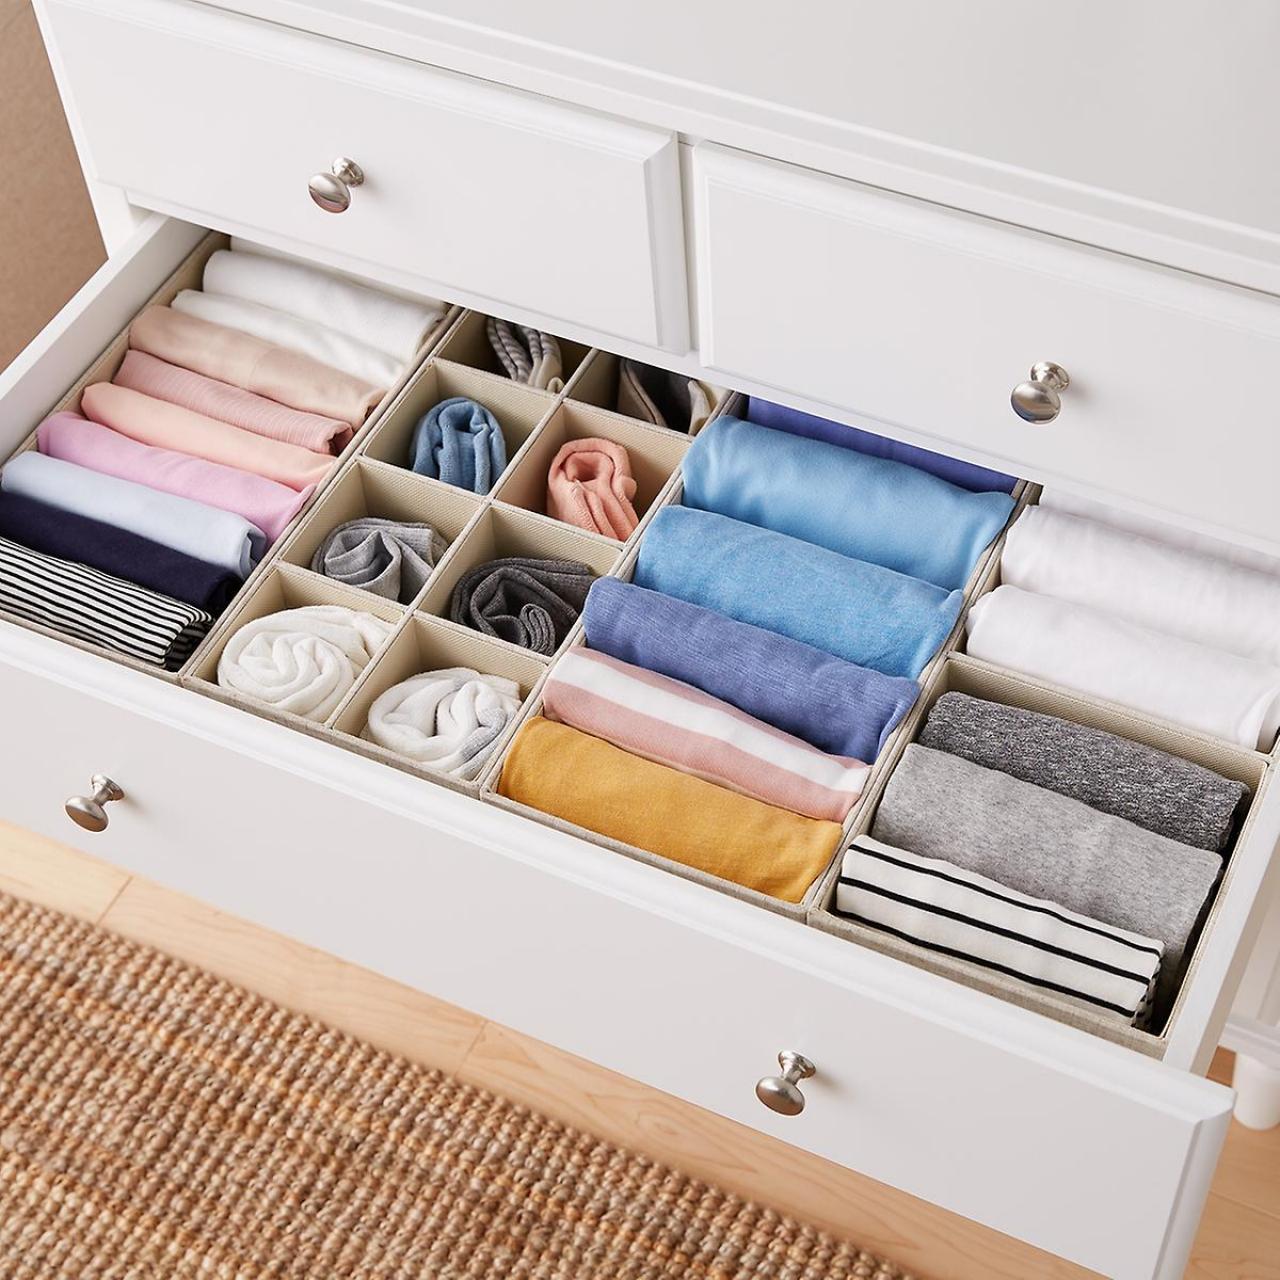 https://hgtvhome.sndimg.com/content/dam/images/hgtv/products/2021/2/16/3/RX_The-Container-Store_Linen-Drawer-Organizers.jpg.rend.hgtvcom.1280.1280.suffix/1613665948800.jpeg